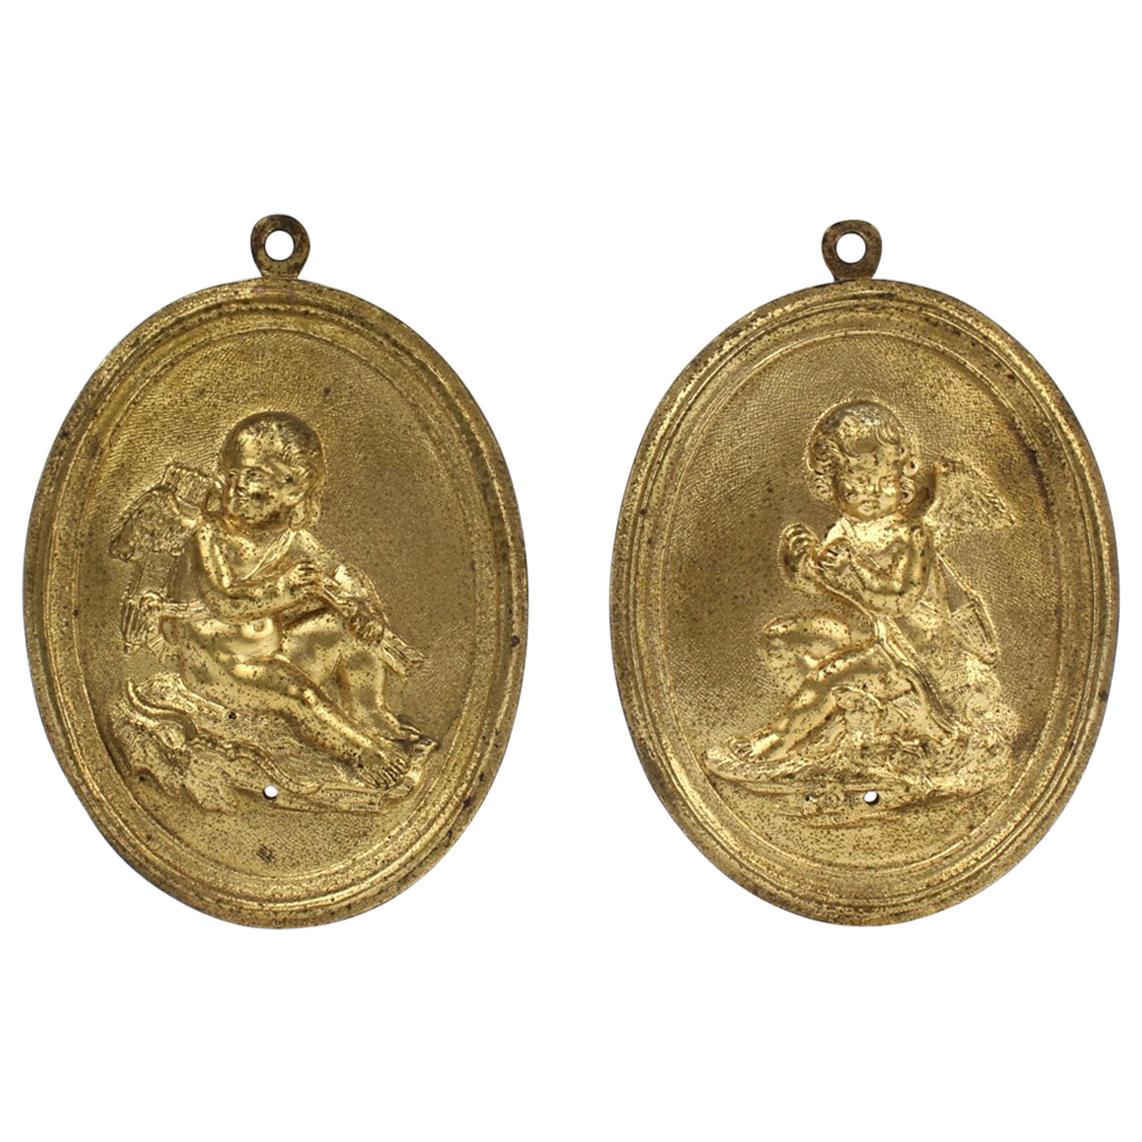 Pair of Antique 19th Century French Gilt Doré Bronze Plaques with Cupid